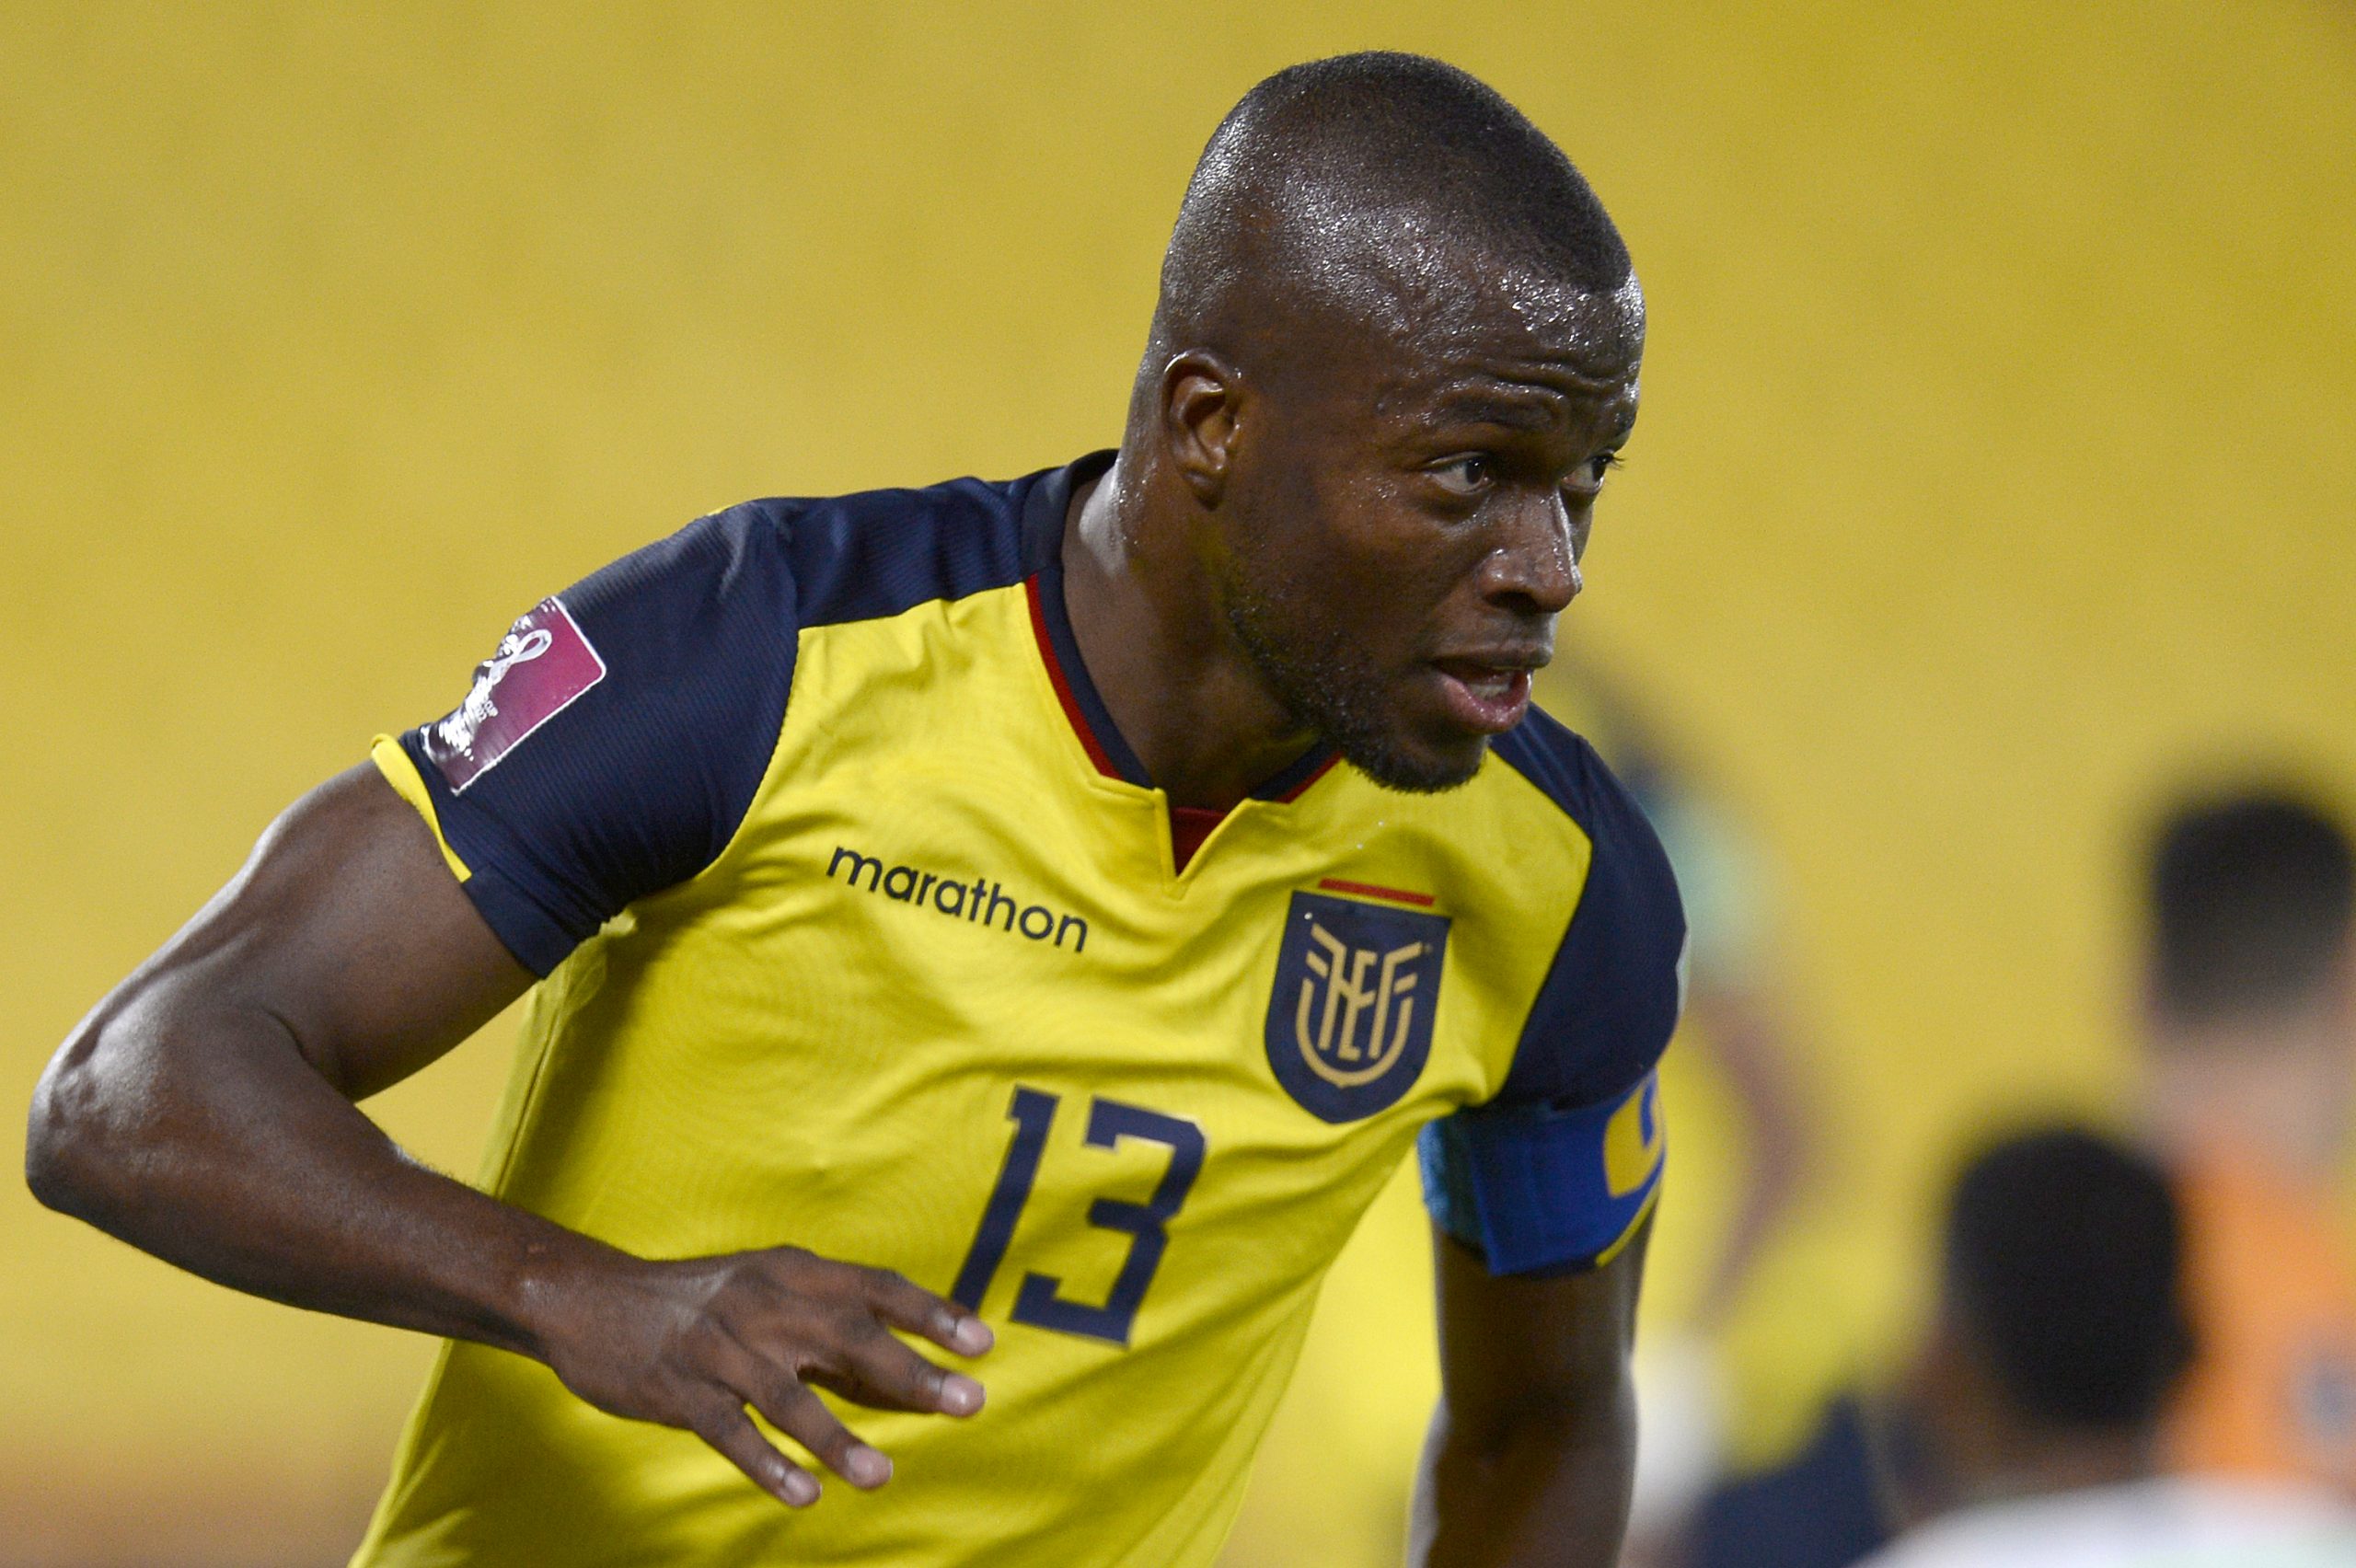 Enner Valencia Age, Salary, Net worth, Current Teams, Career, Height, and much more